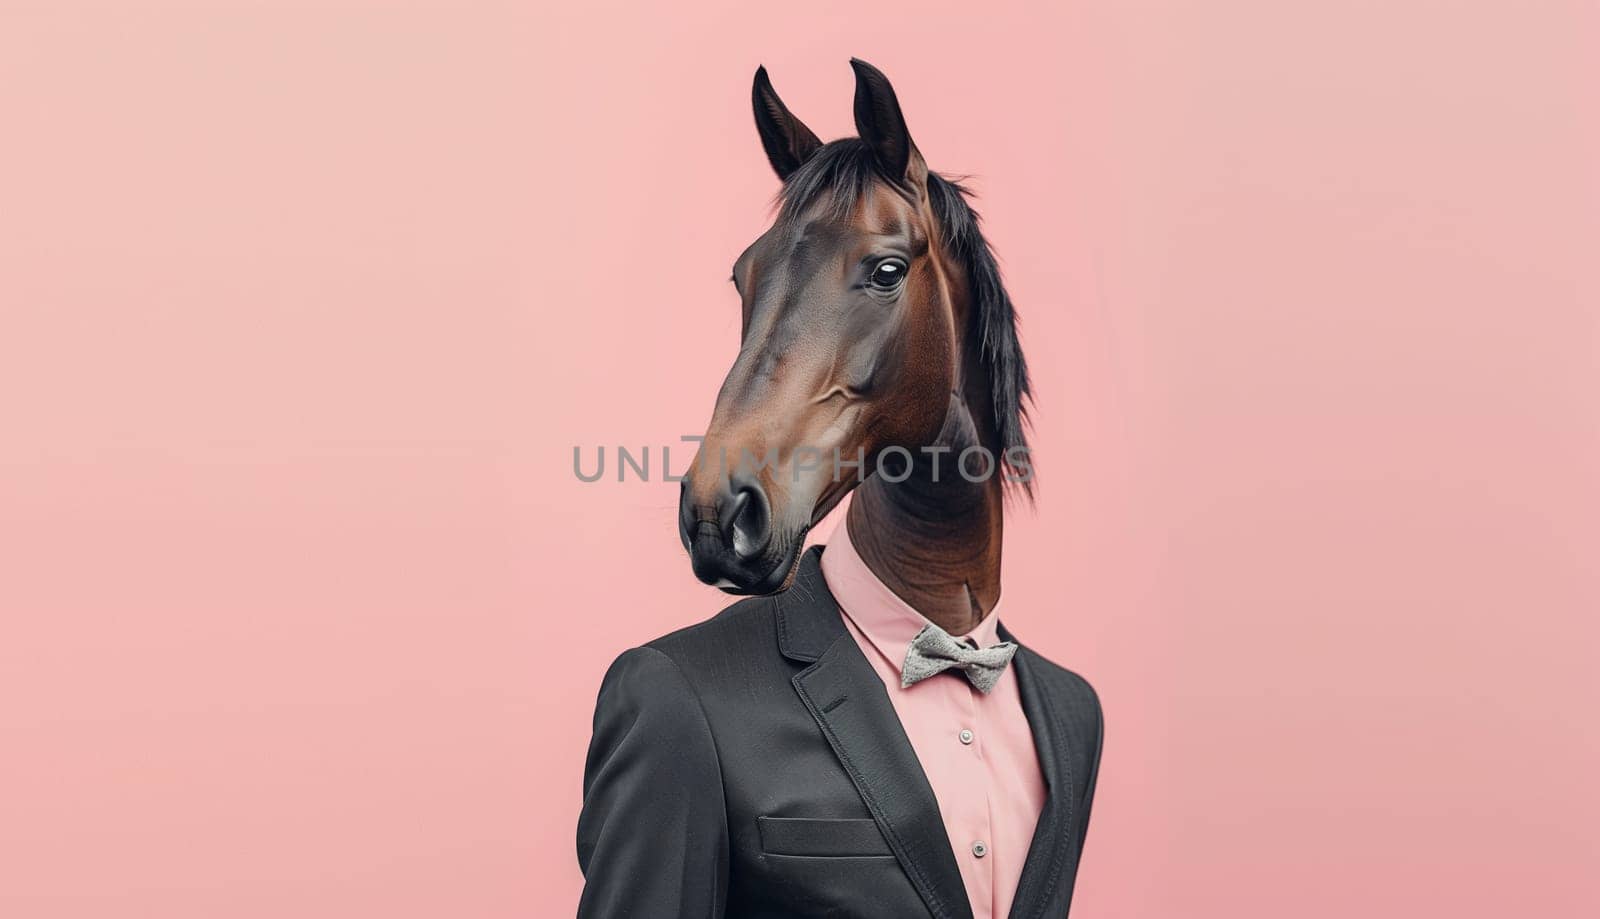 Portrait of stylish horse in a business suit looking away on a pink background, animal, creative concept